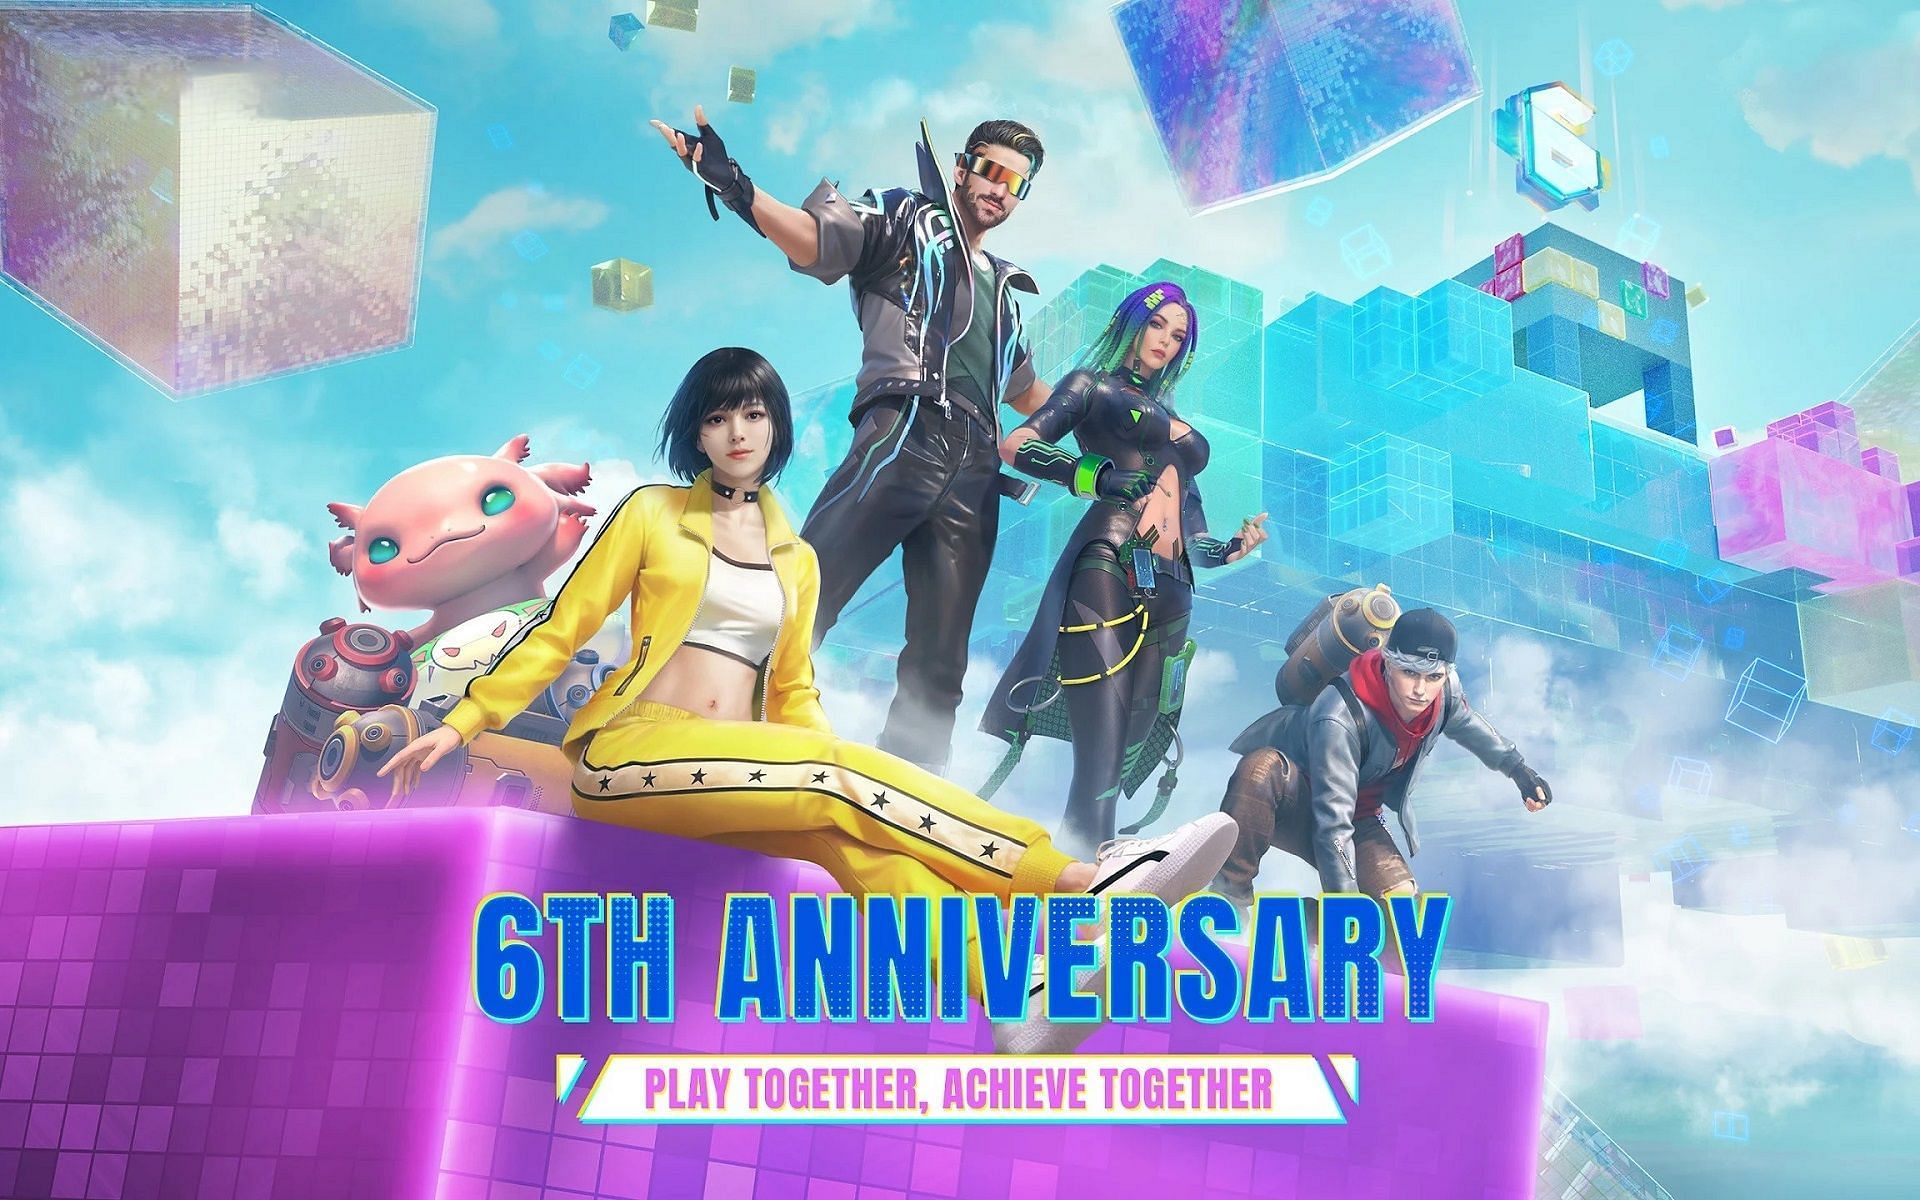 Free Fire 6th Anniversary items have been leaked (Image via Garena)